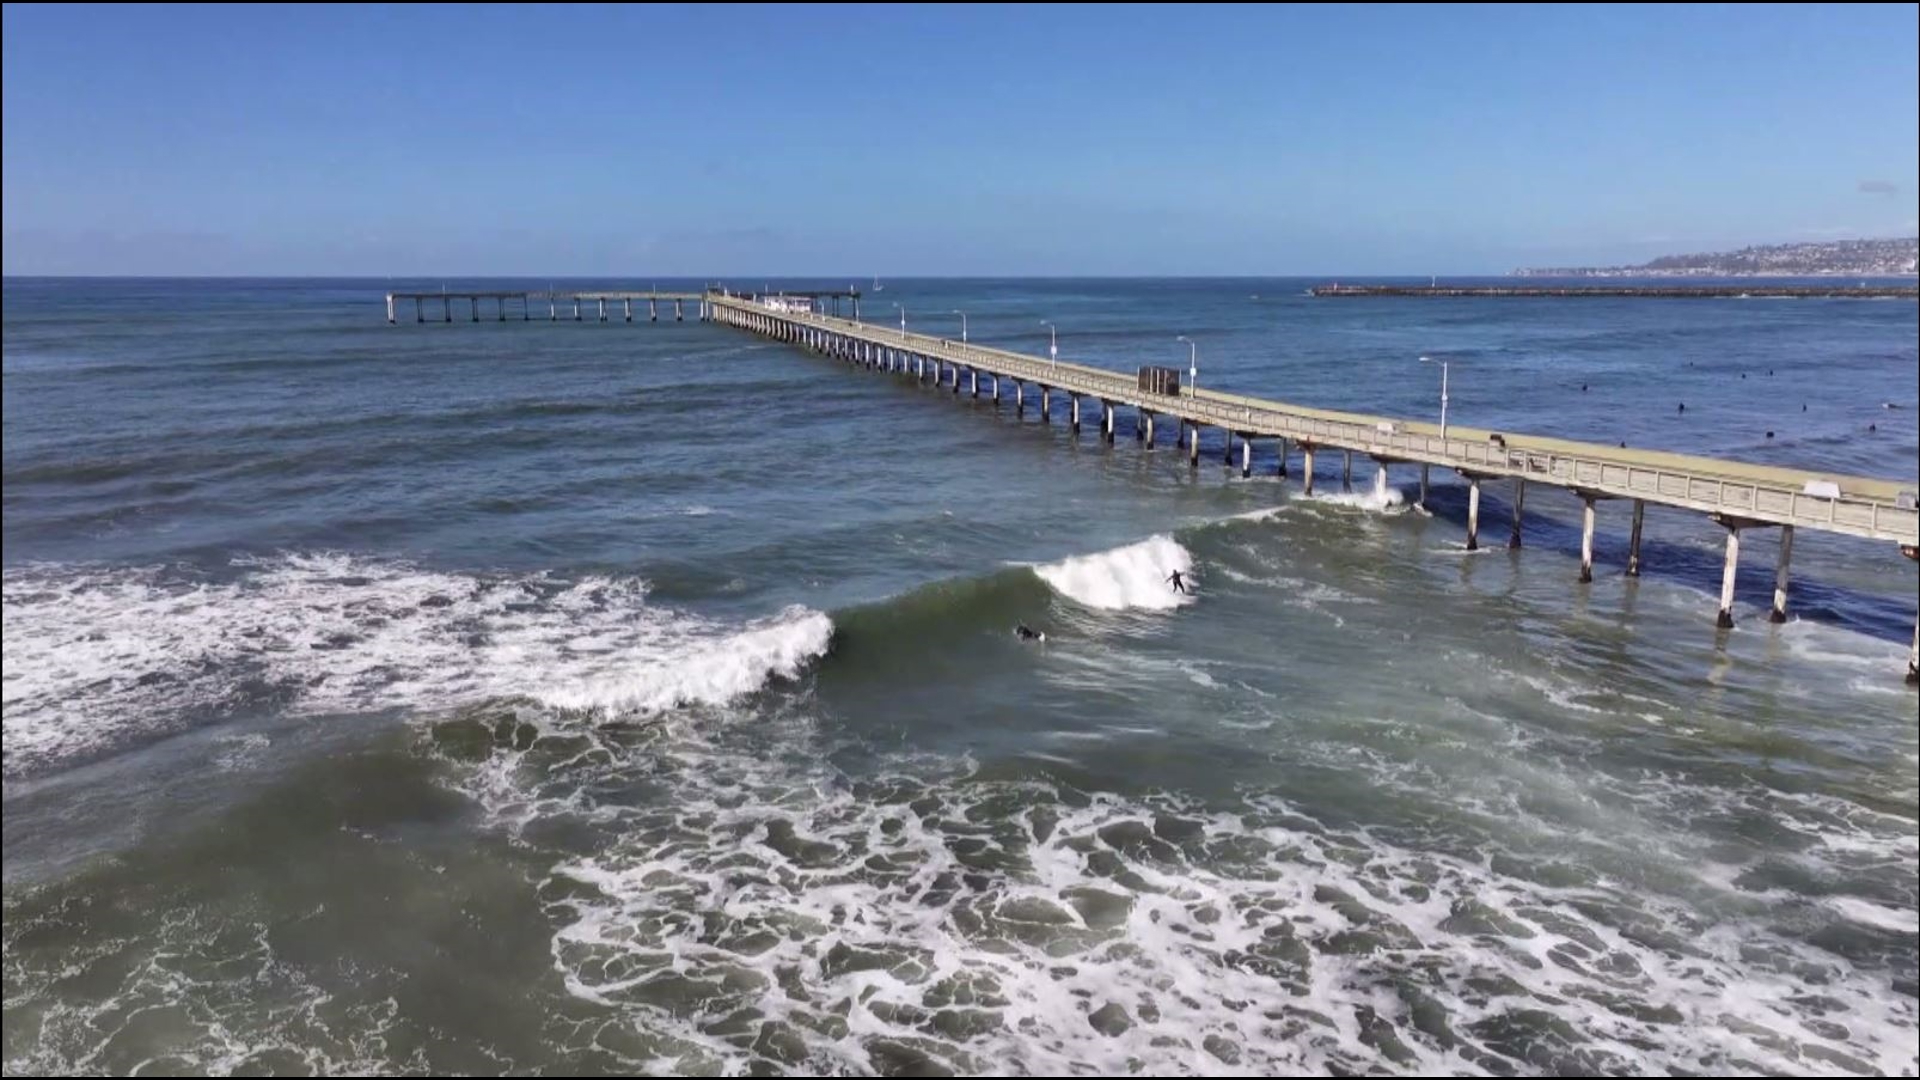 The city estimates it will cost up to $190 million to replace the pier and is looking to finalize the design and start an environmental review.